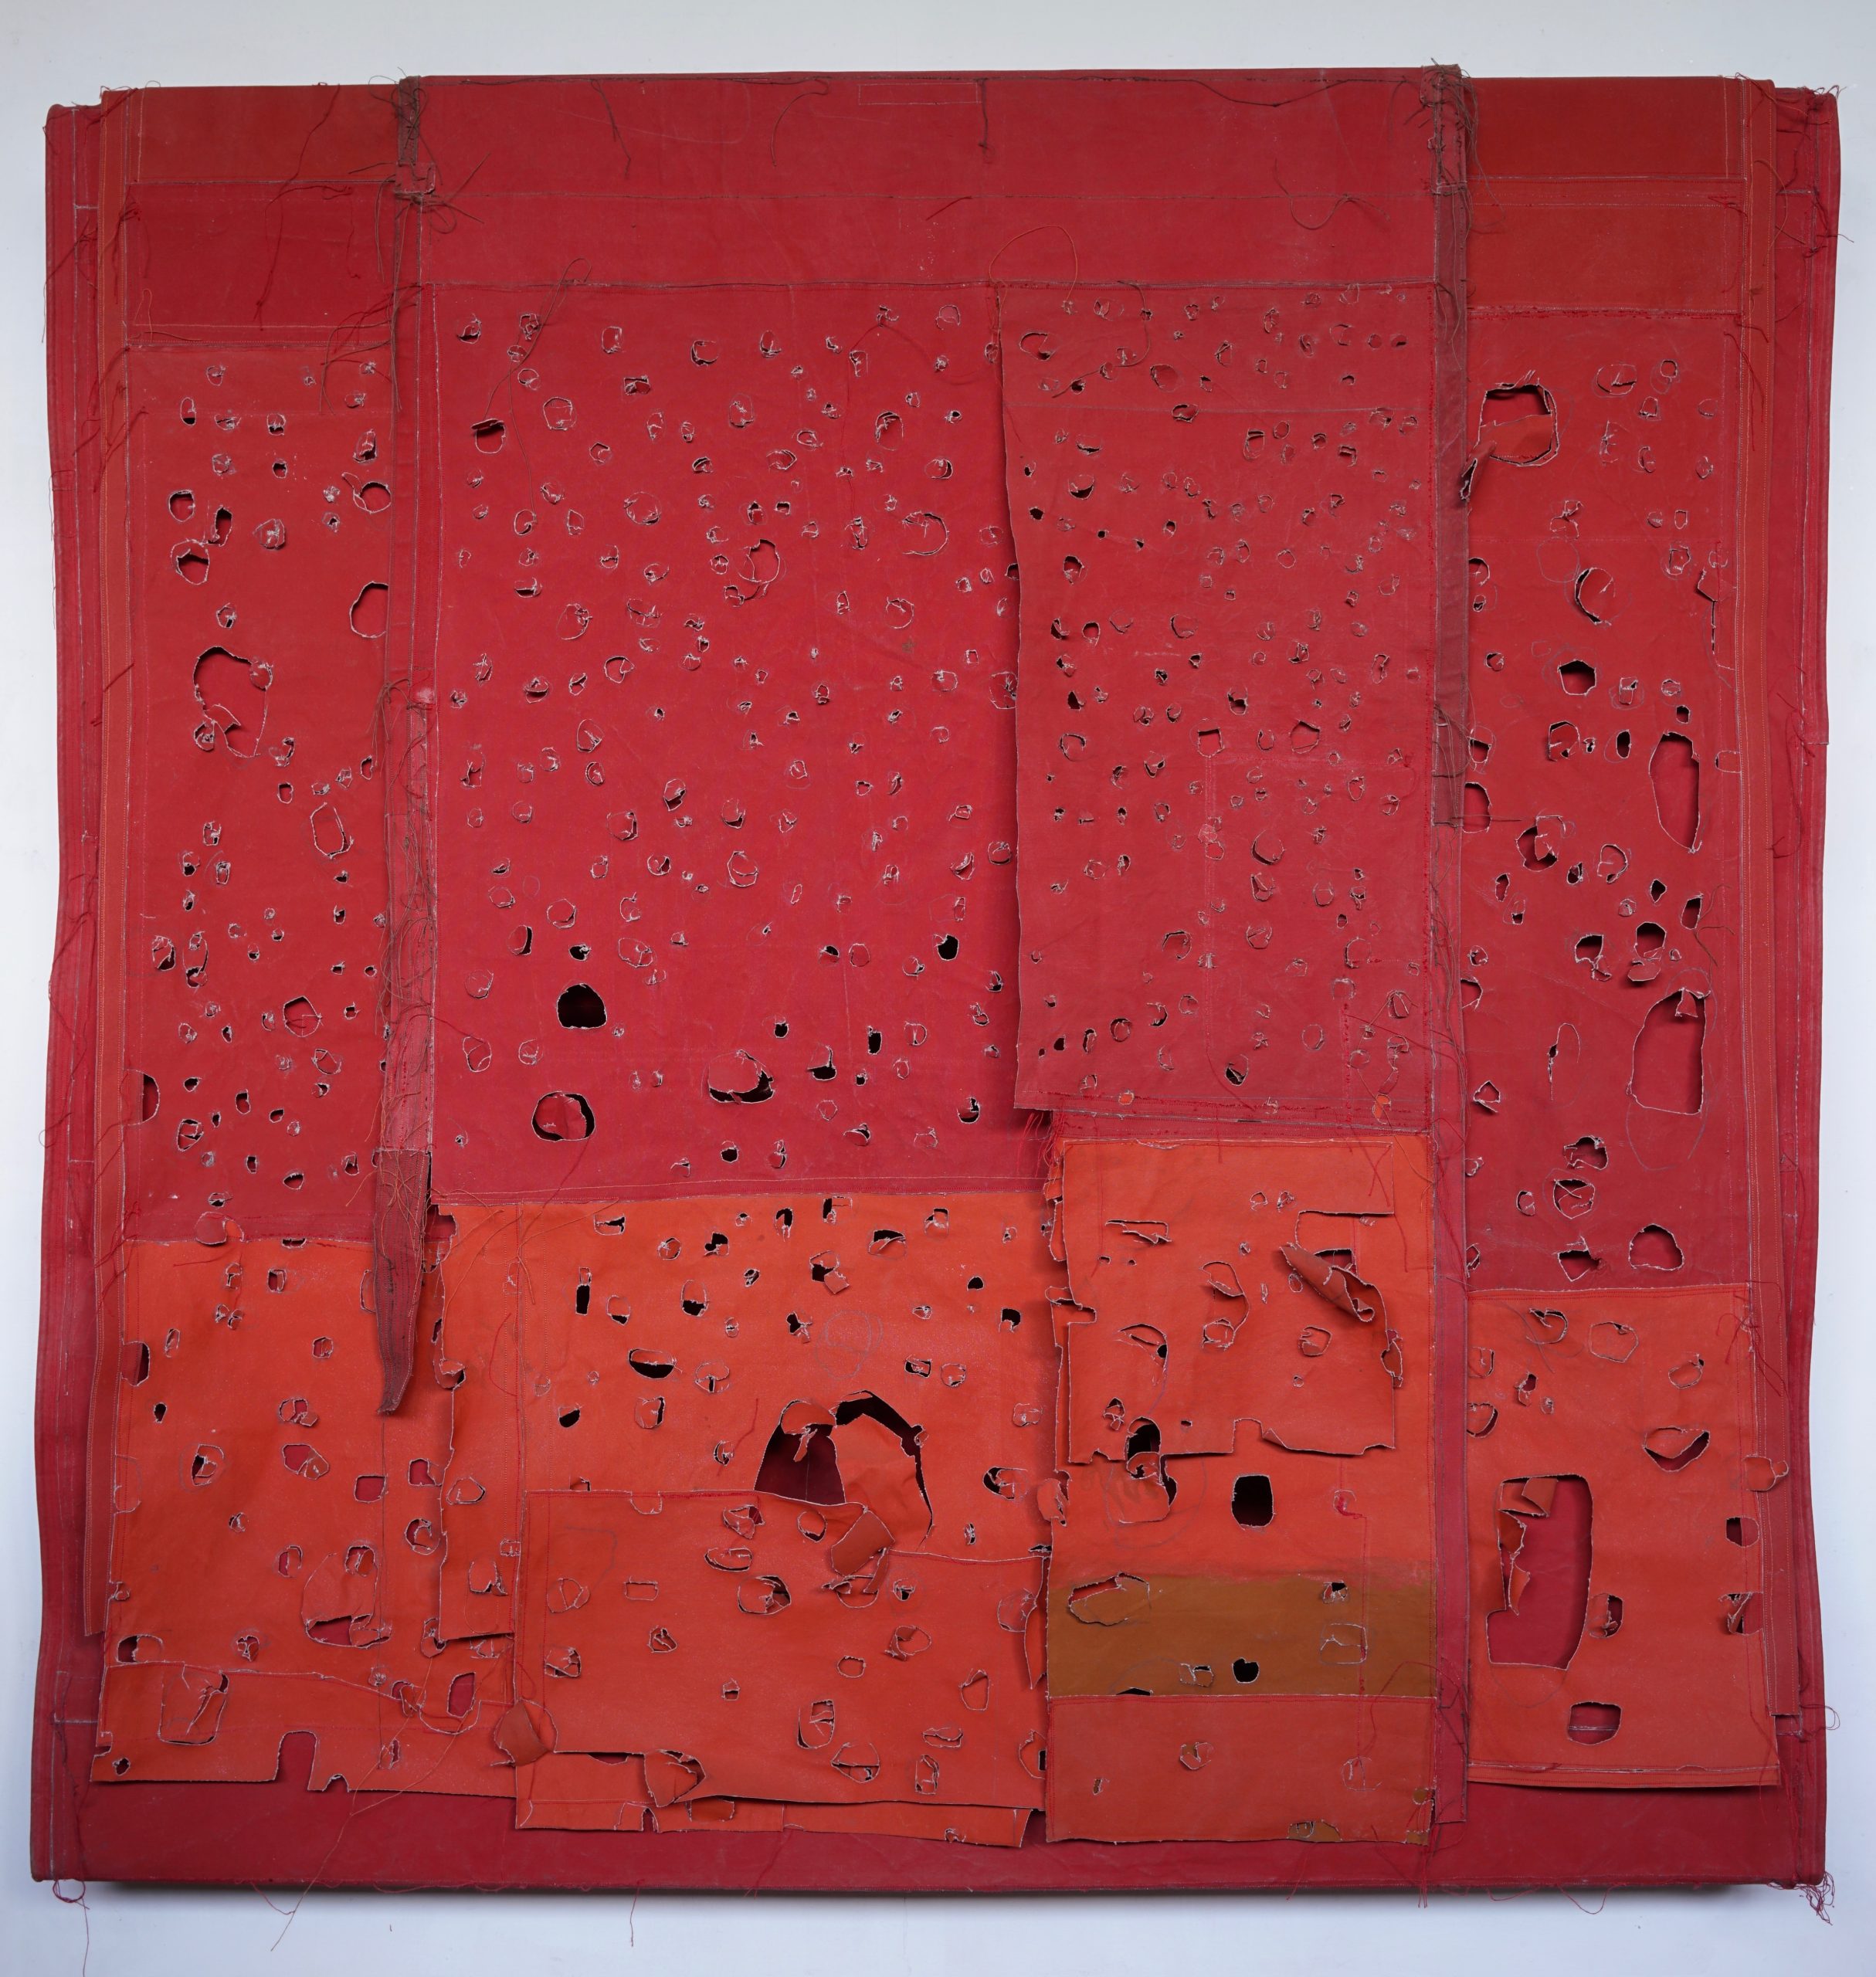 A canvas covered in ripped and damaged patches of various shades of red.